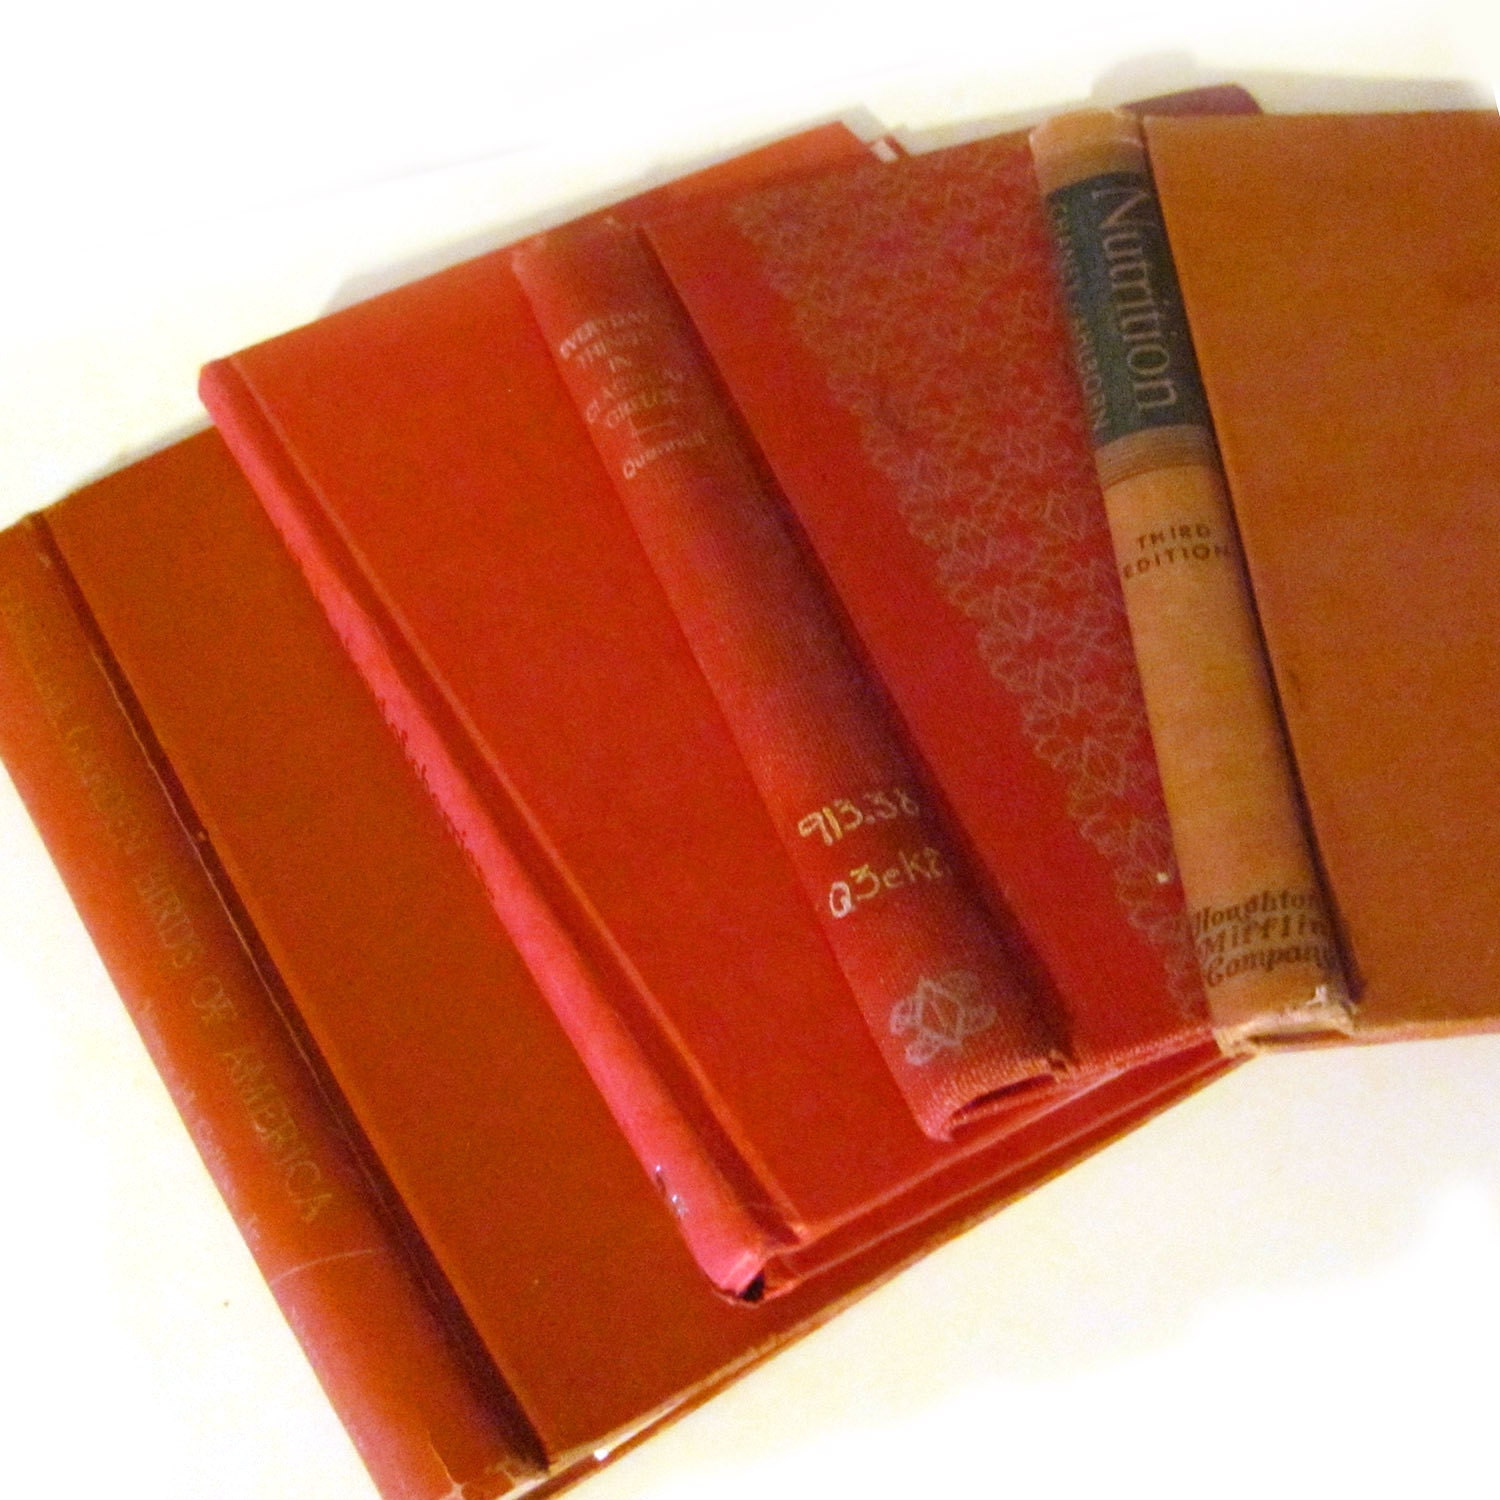 DIY rusty red book covers ready to make your own journal